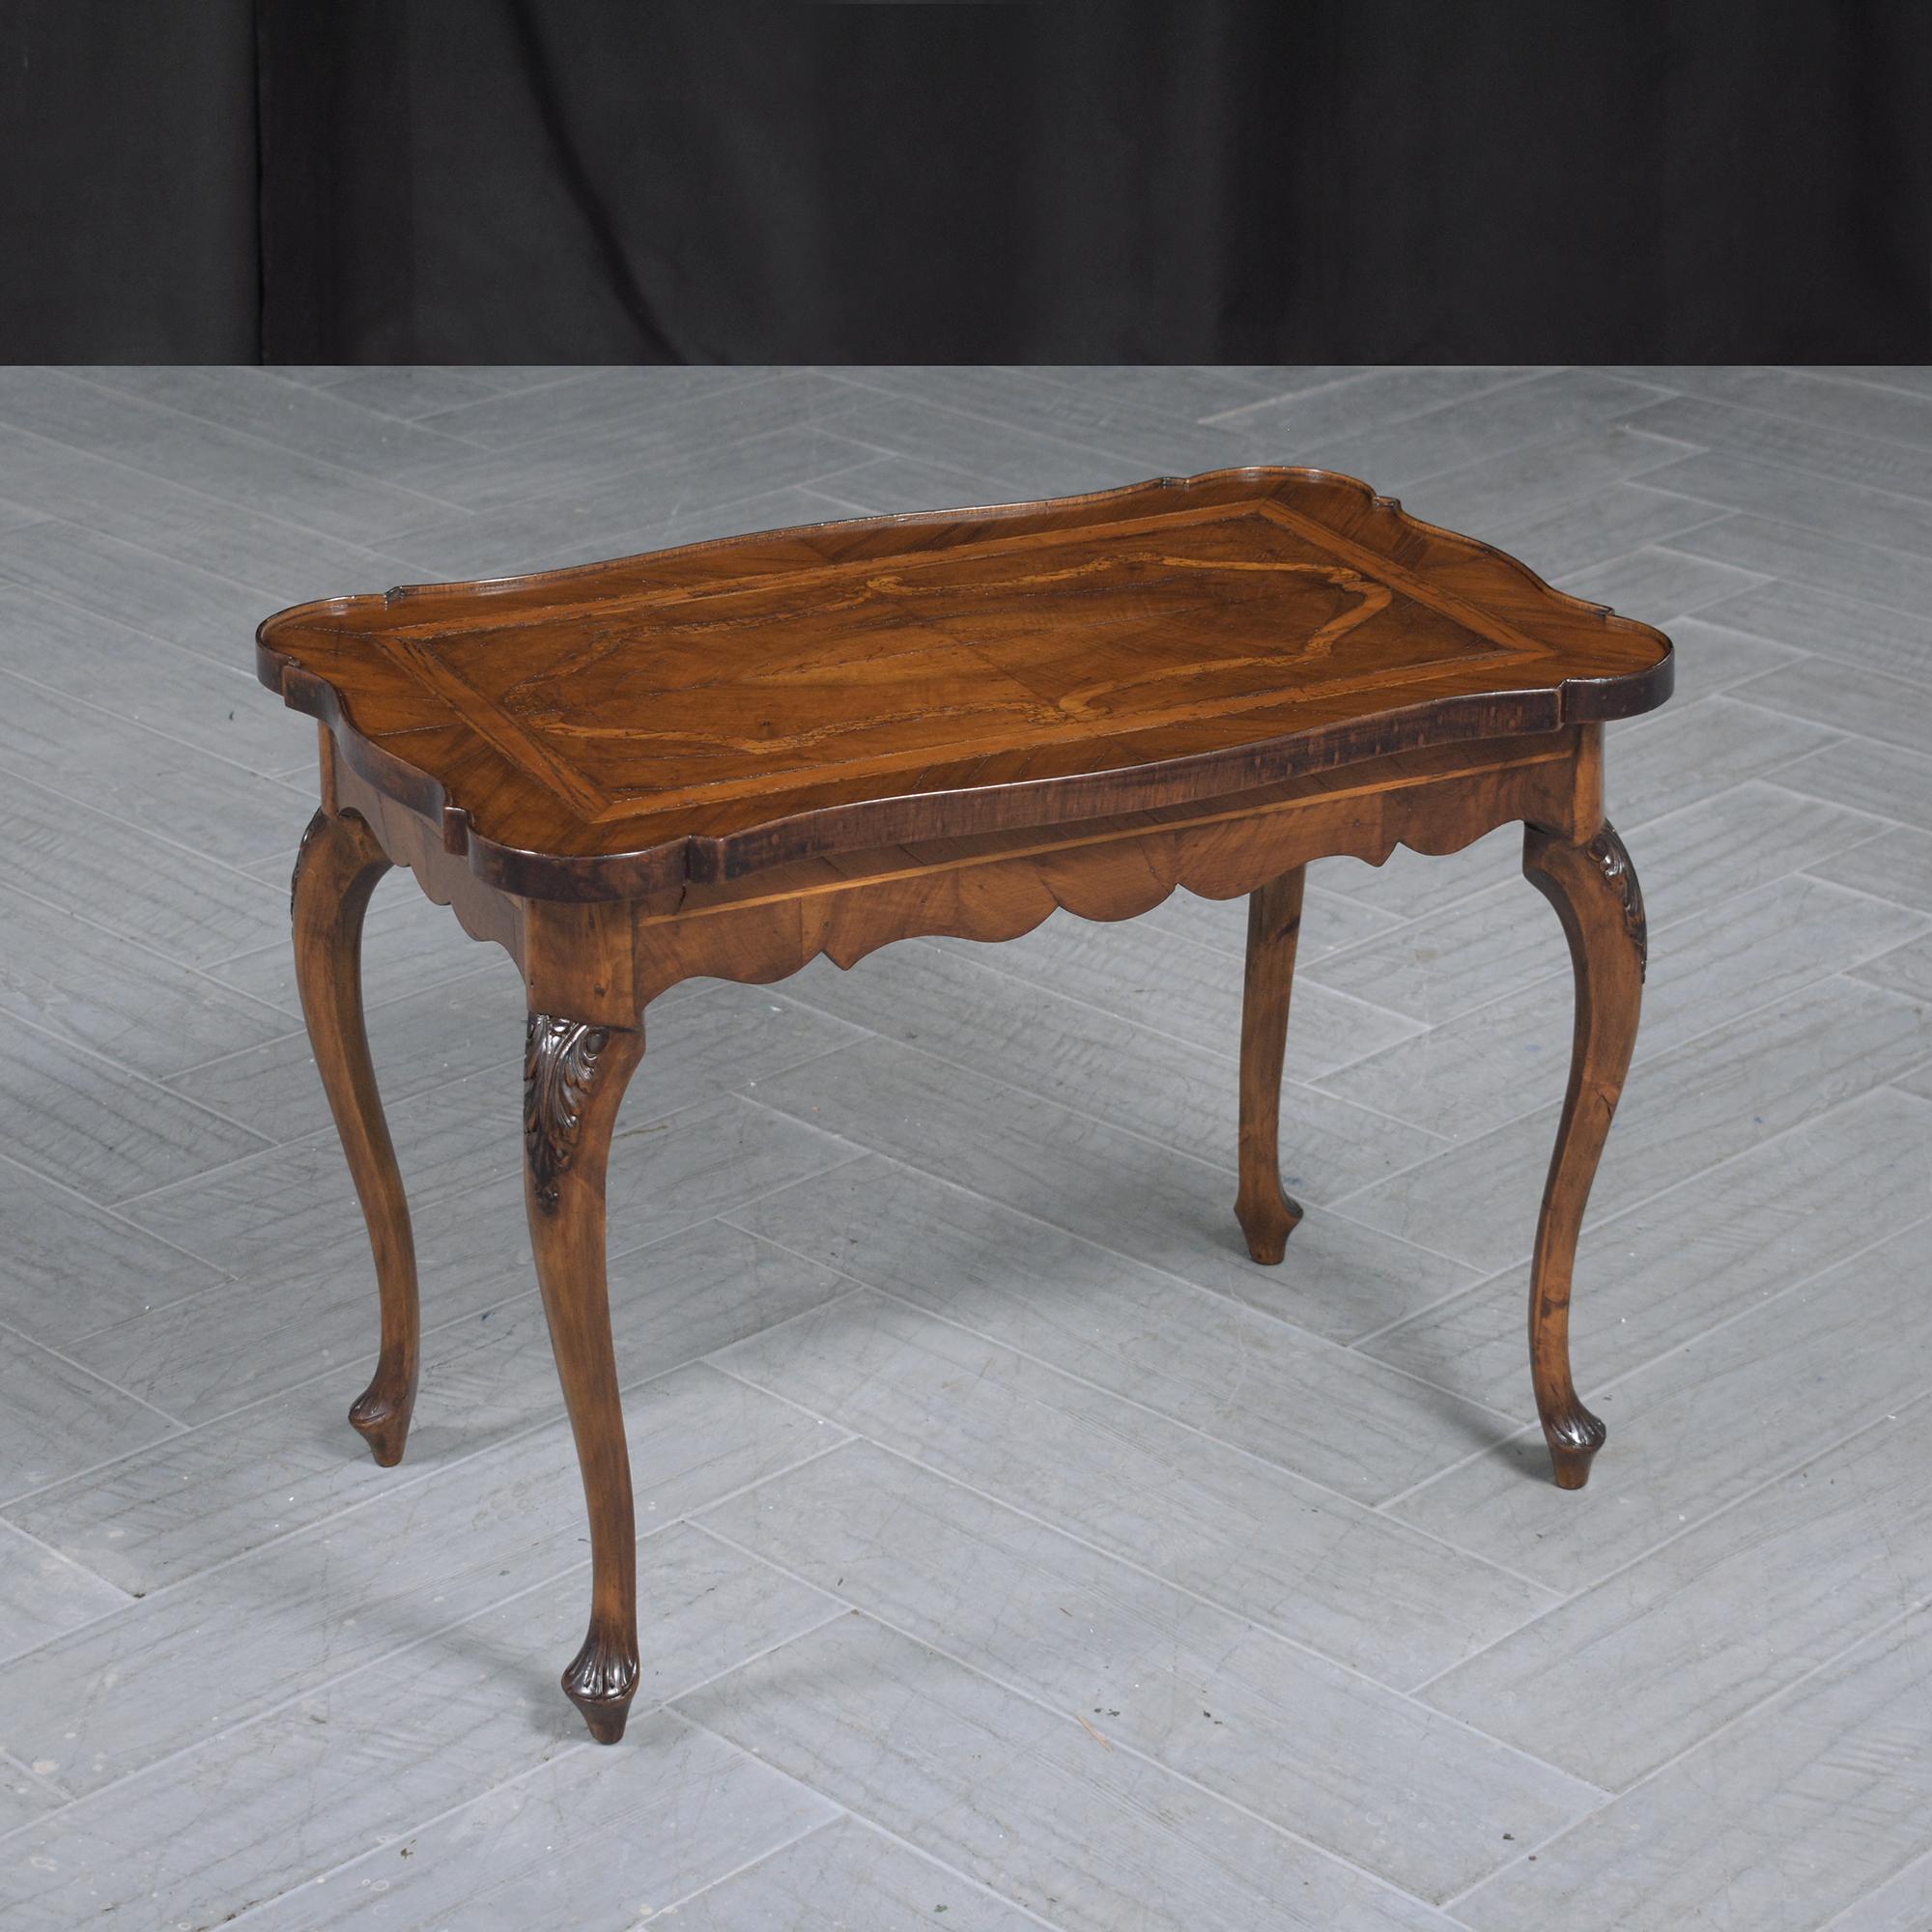 Step into history with our exquisite late 19th-century English walnut side table, a pristine example of the rich heritage of antique craftsmanship and design. Expertly restored by our skilled artisanal team, this side table retains its original